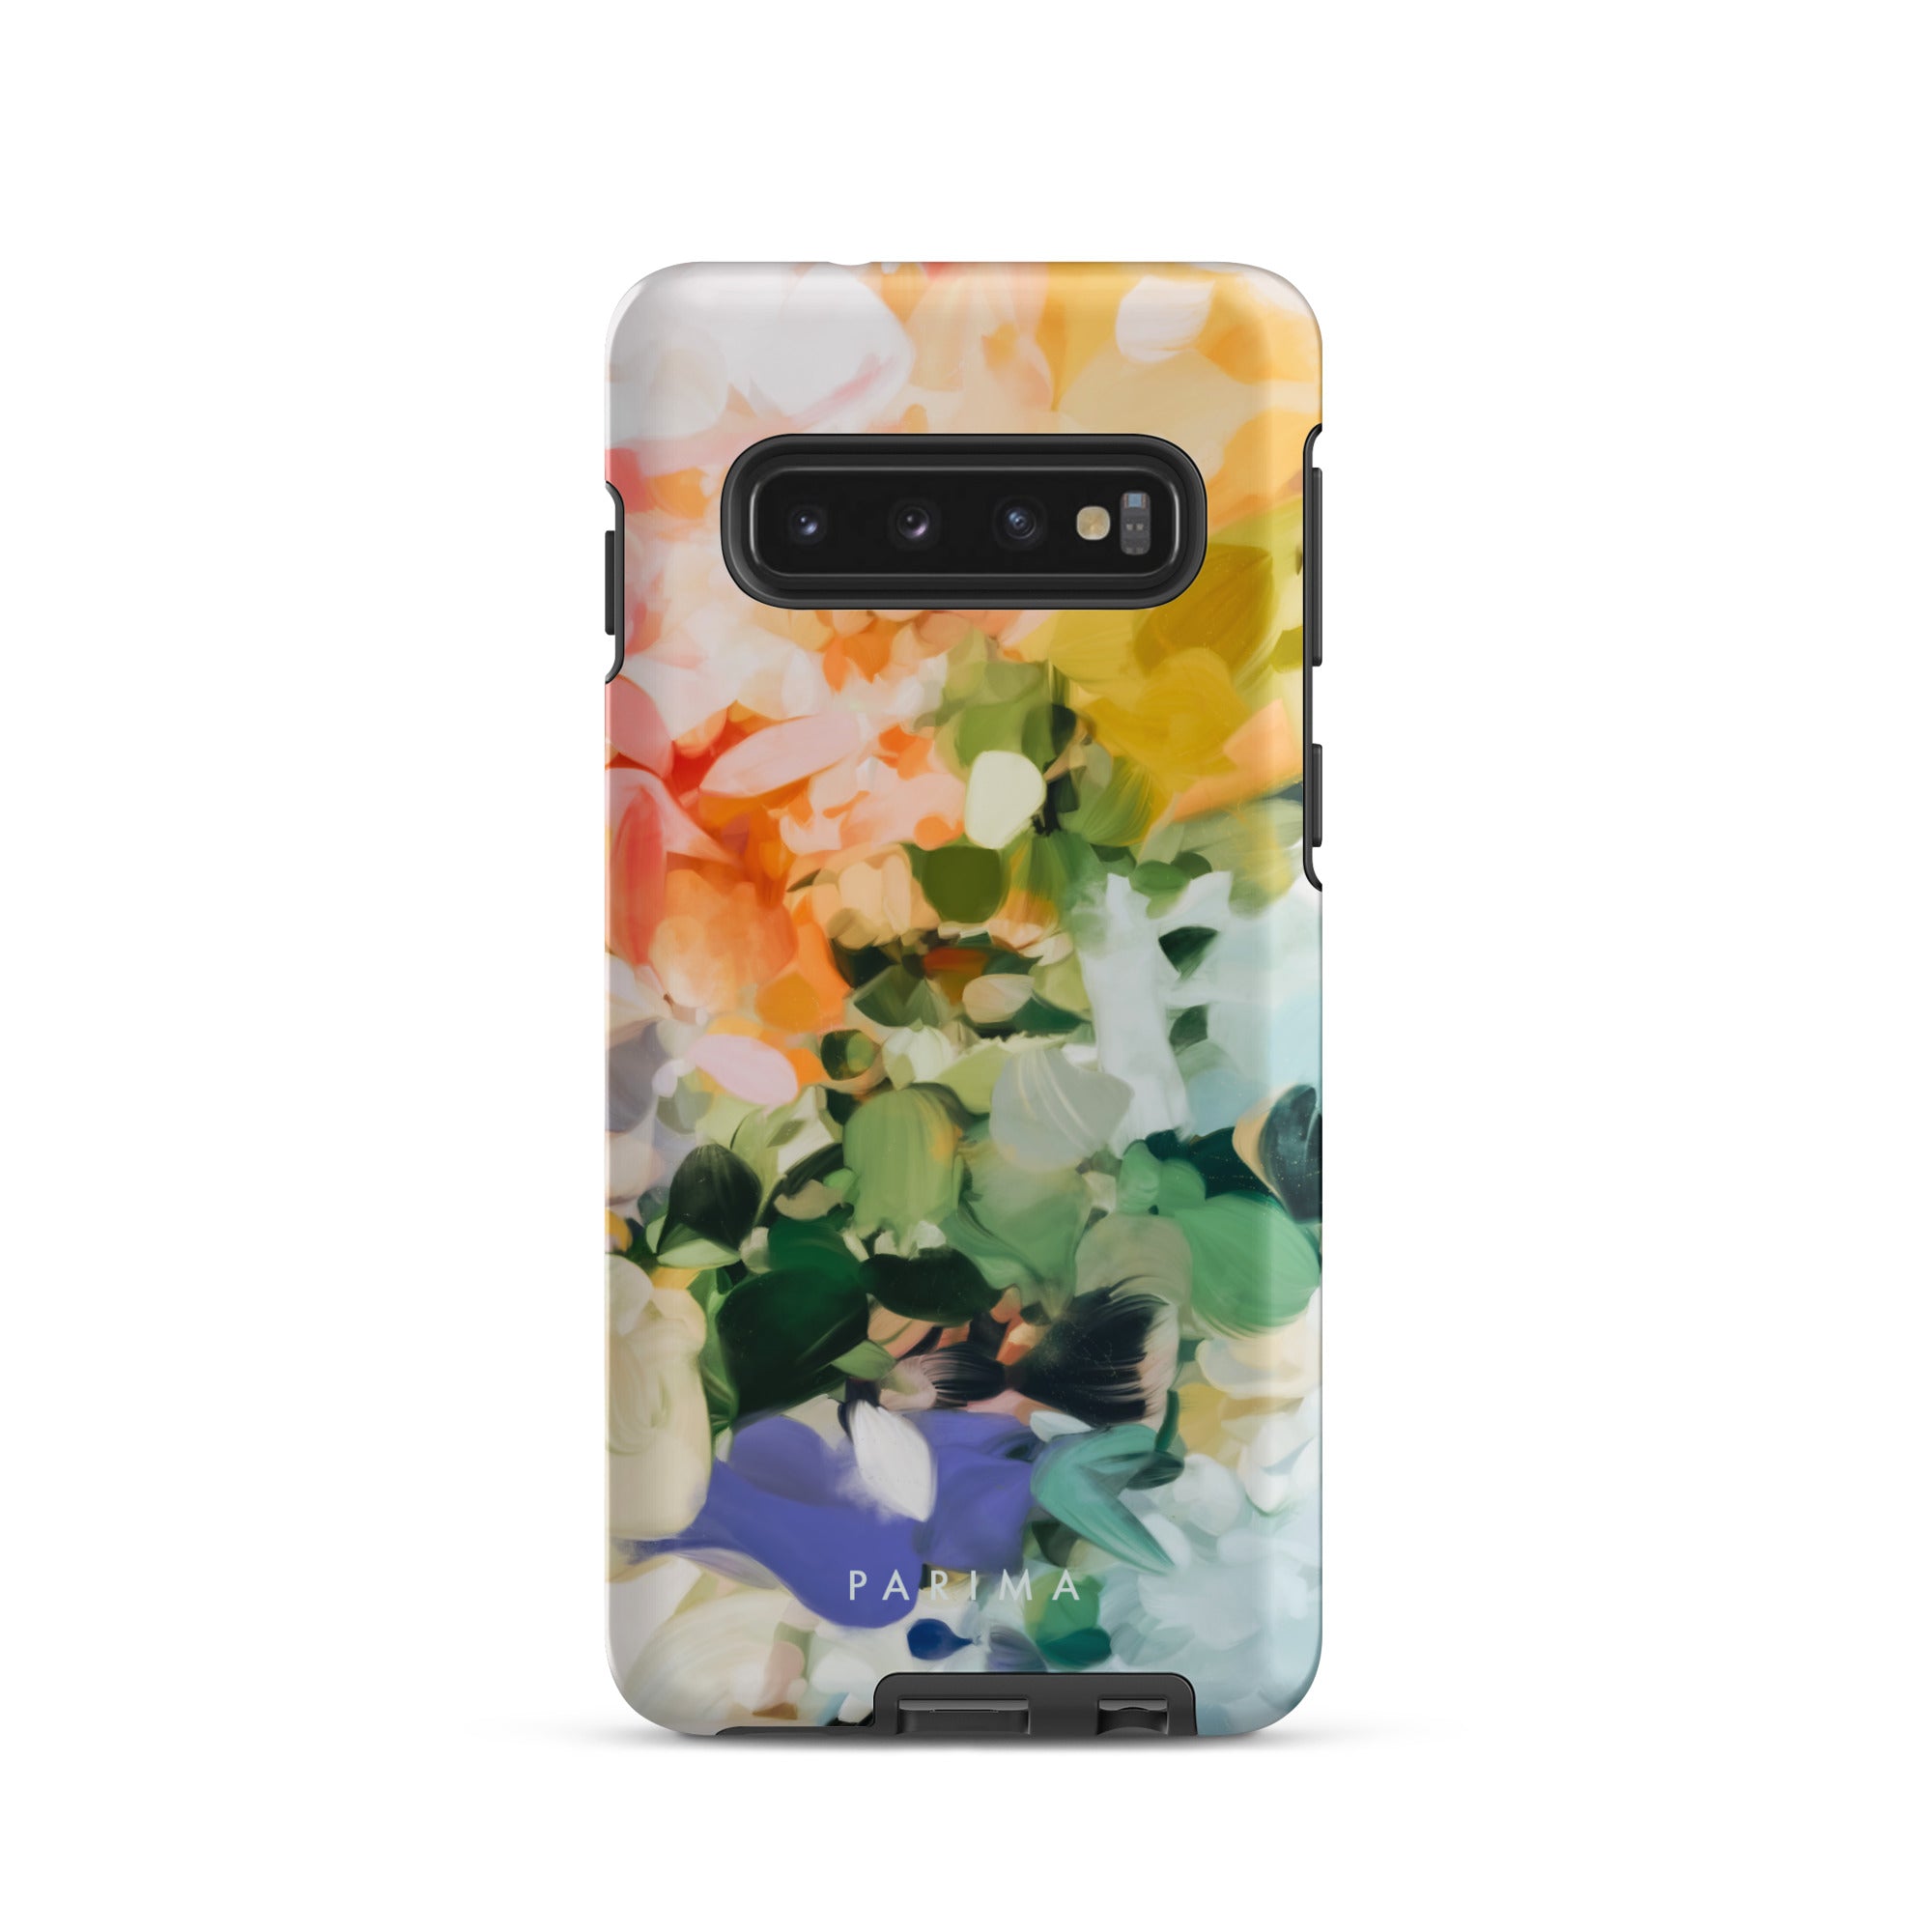 June, green and yellow abstract art on Samsung Galaxy S10 tough case by Parima Studio